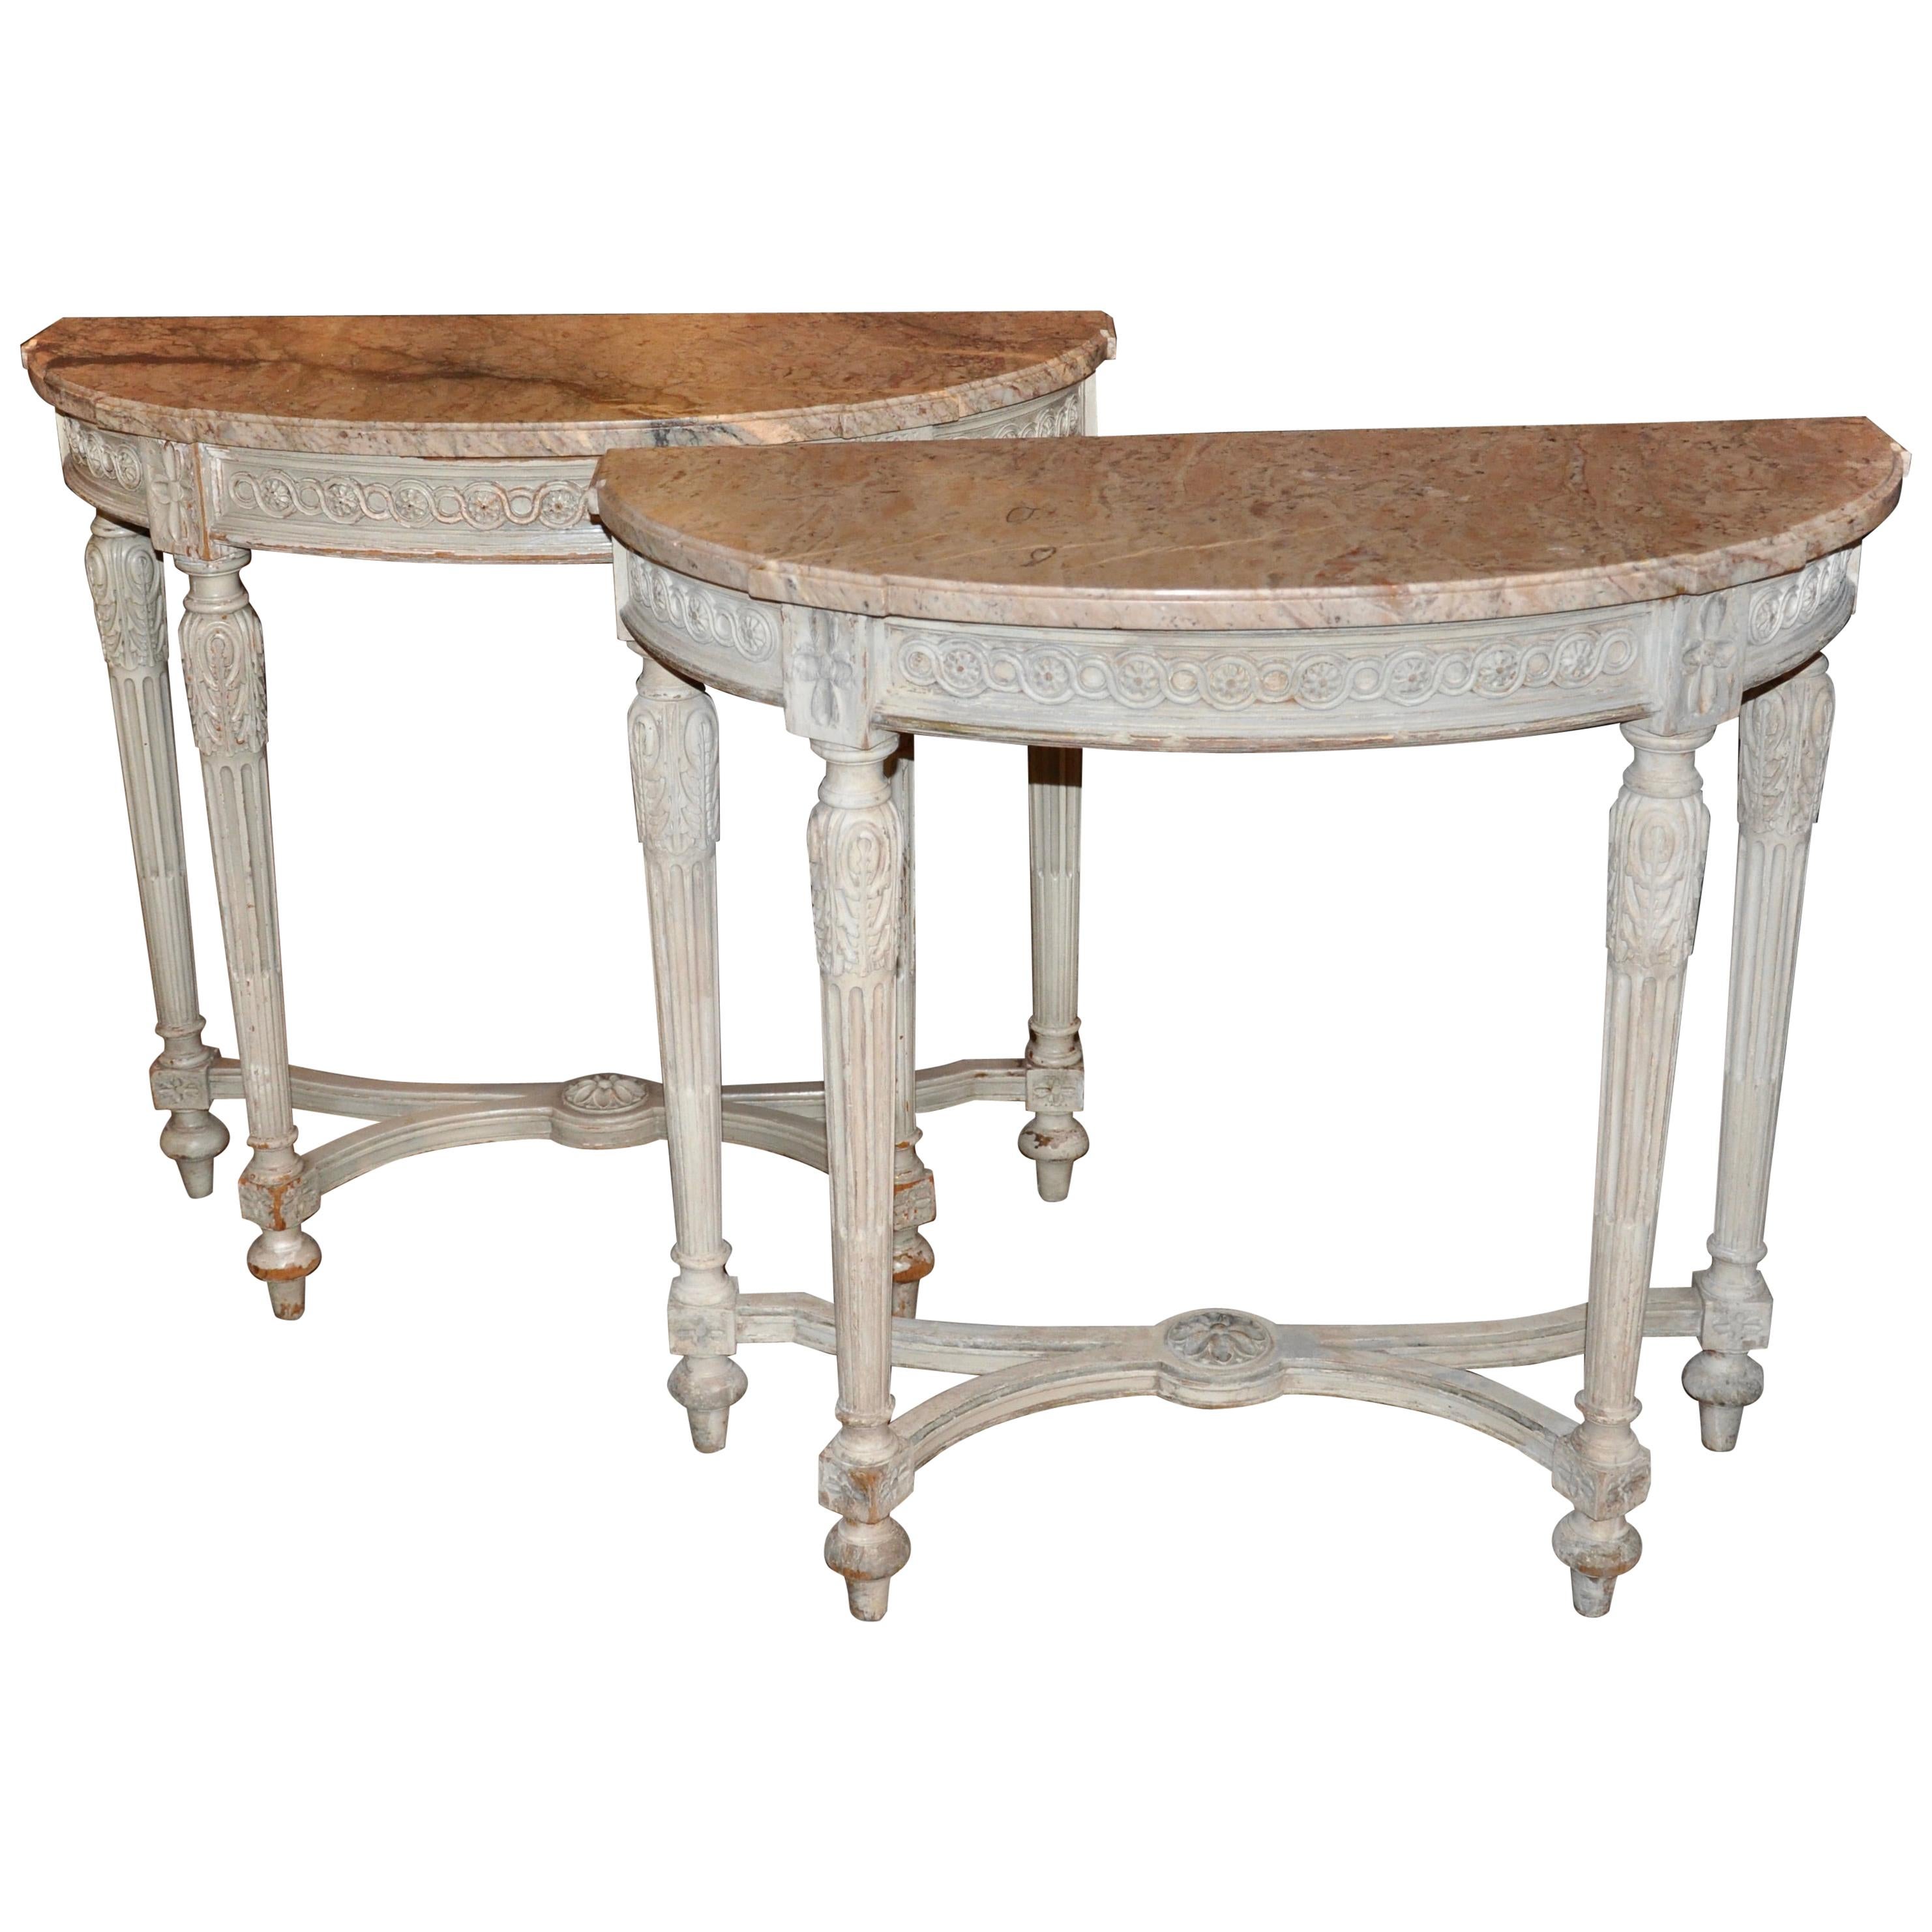 Pair of Early Painted Neoclassical Console Tables with Marble Tops by Jansen